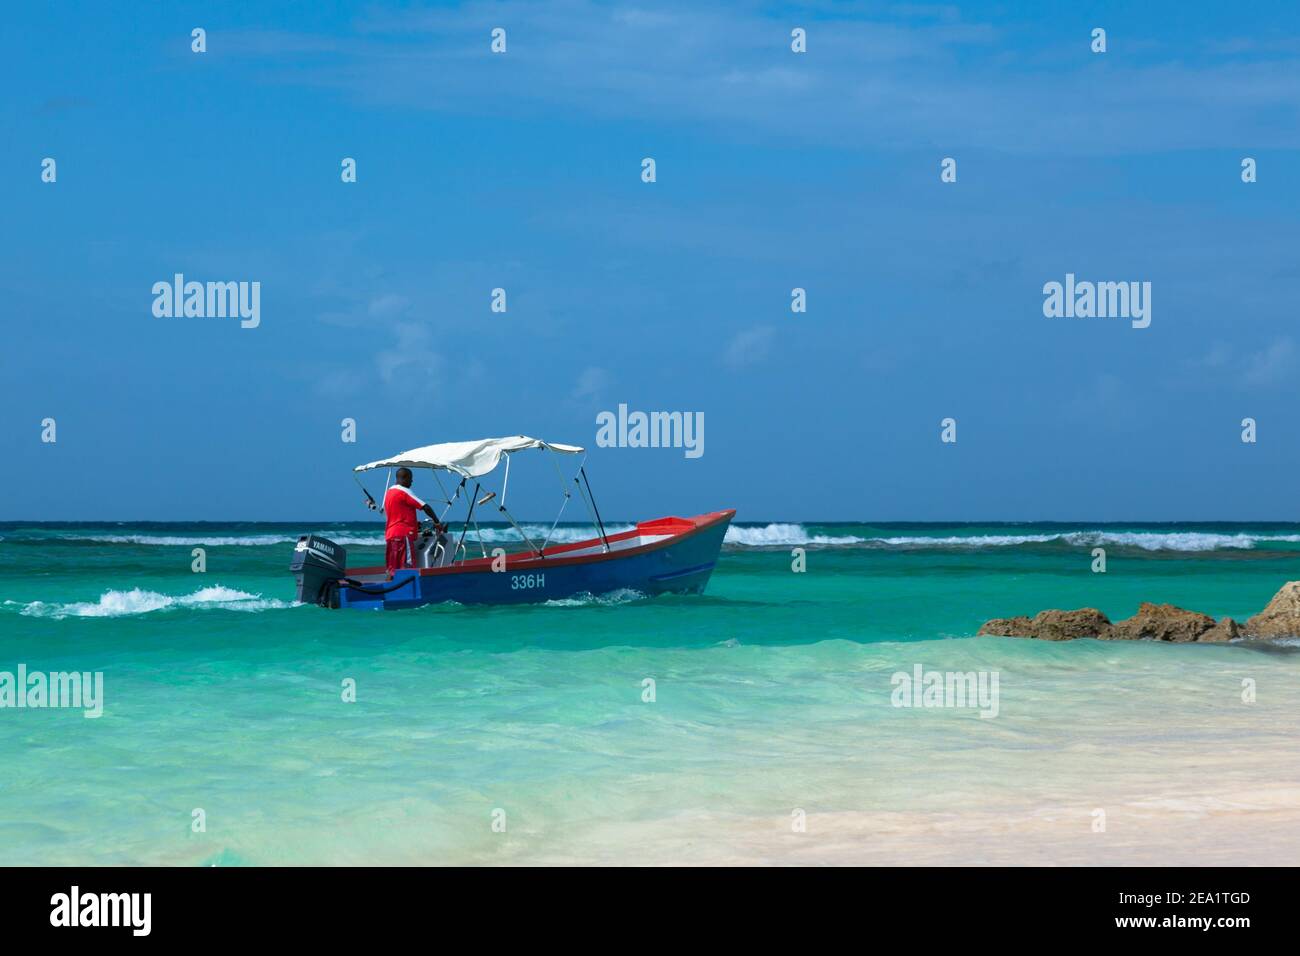 Barbadian men in red skirt  on blue boat in azure water of Caribbean sea. Worthing beach in Barbados. Stock Photo